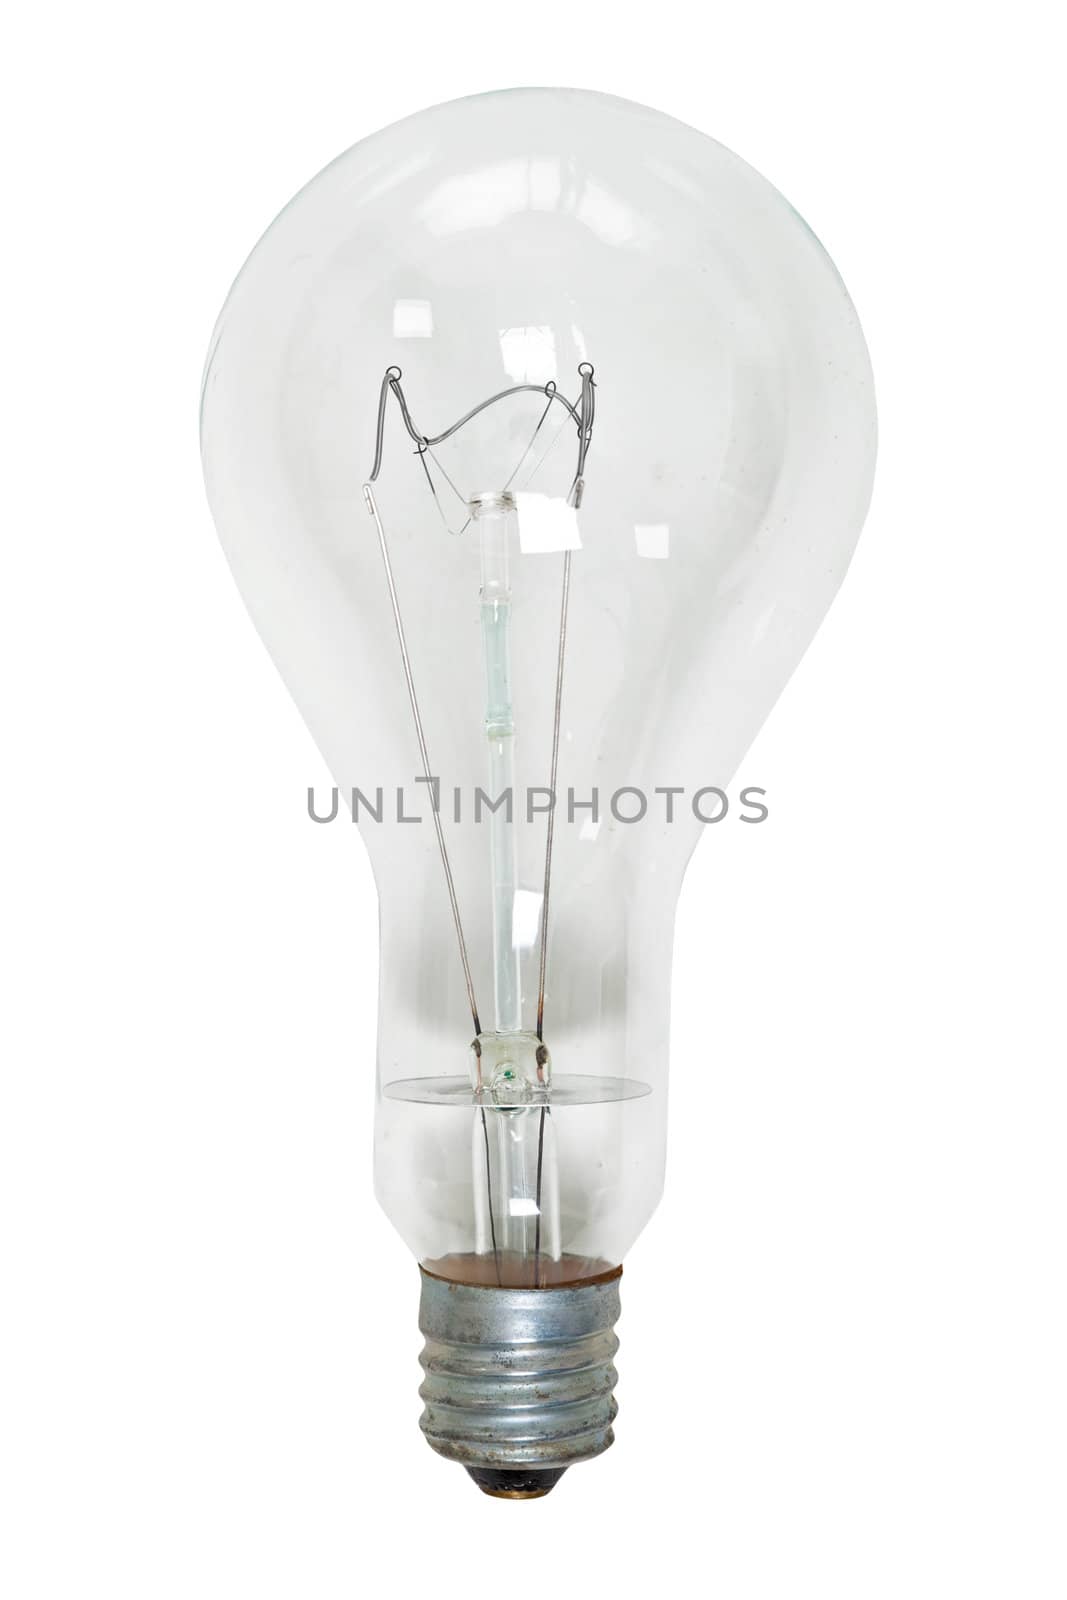 The big glass electric bulb on a white background